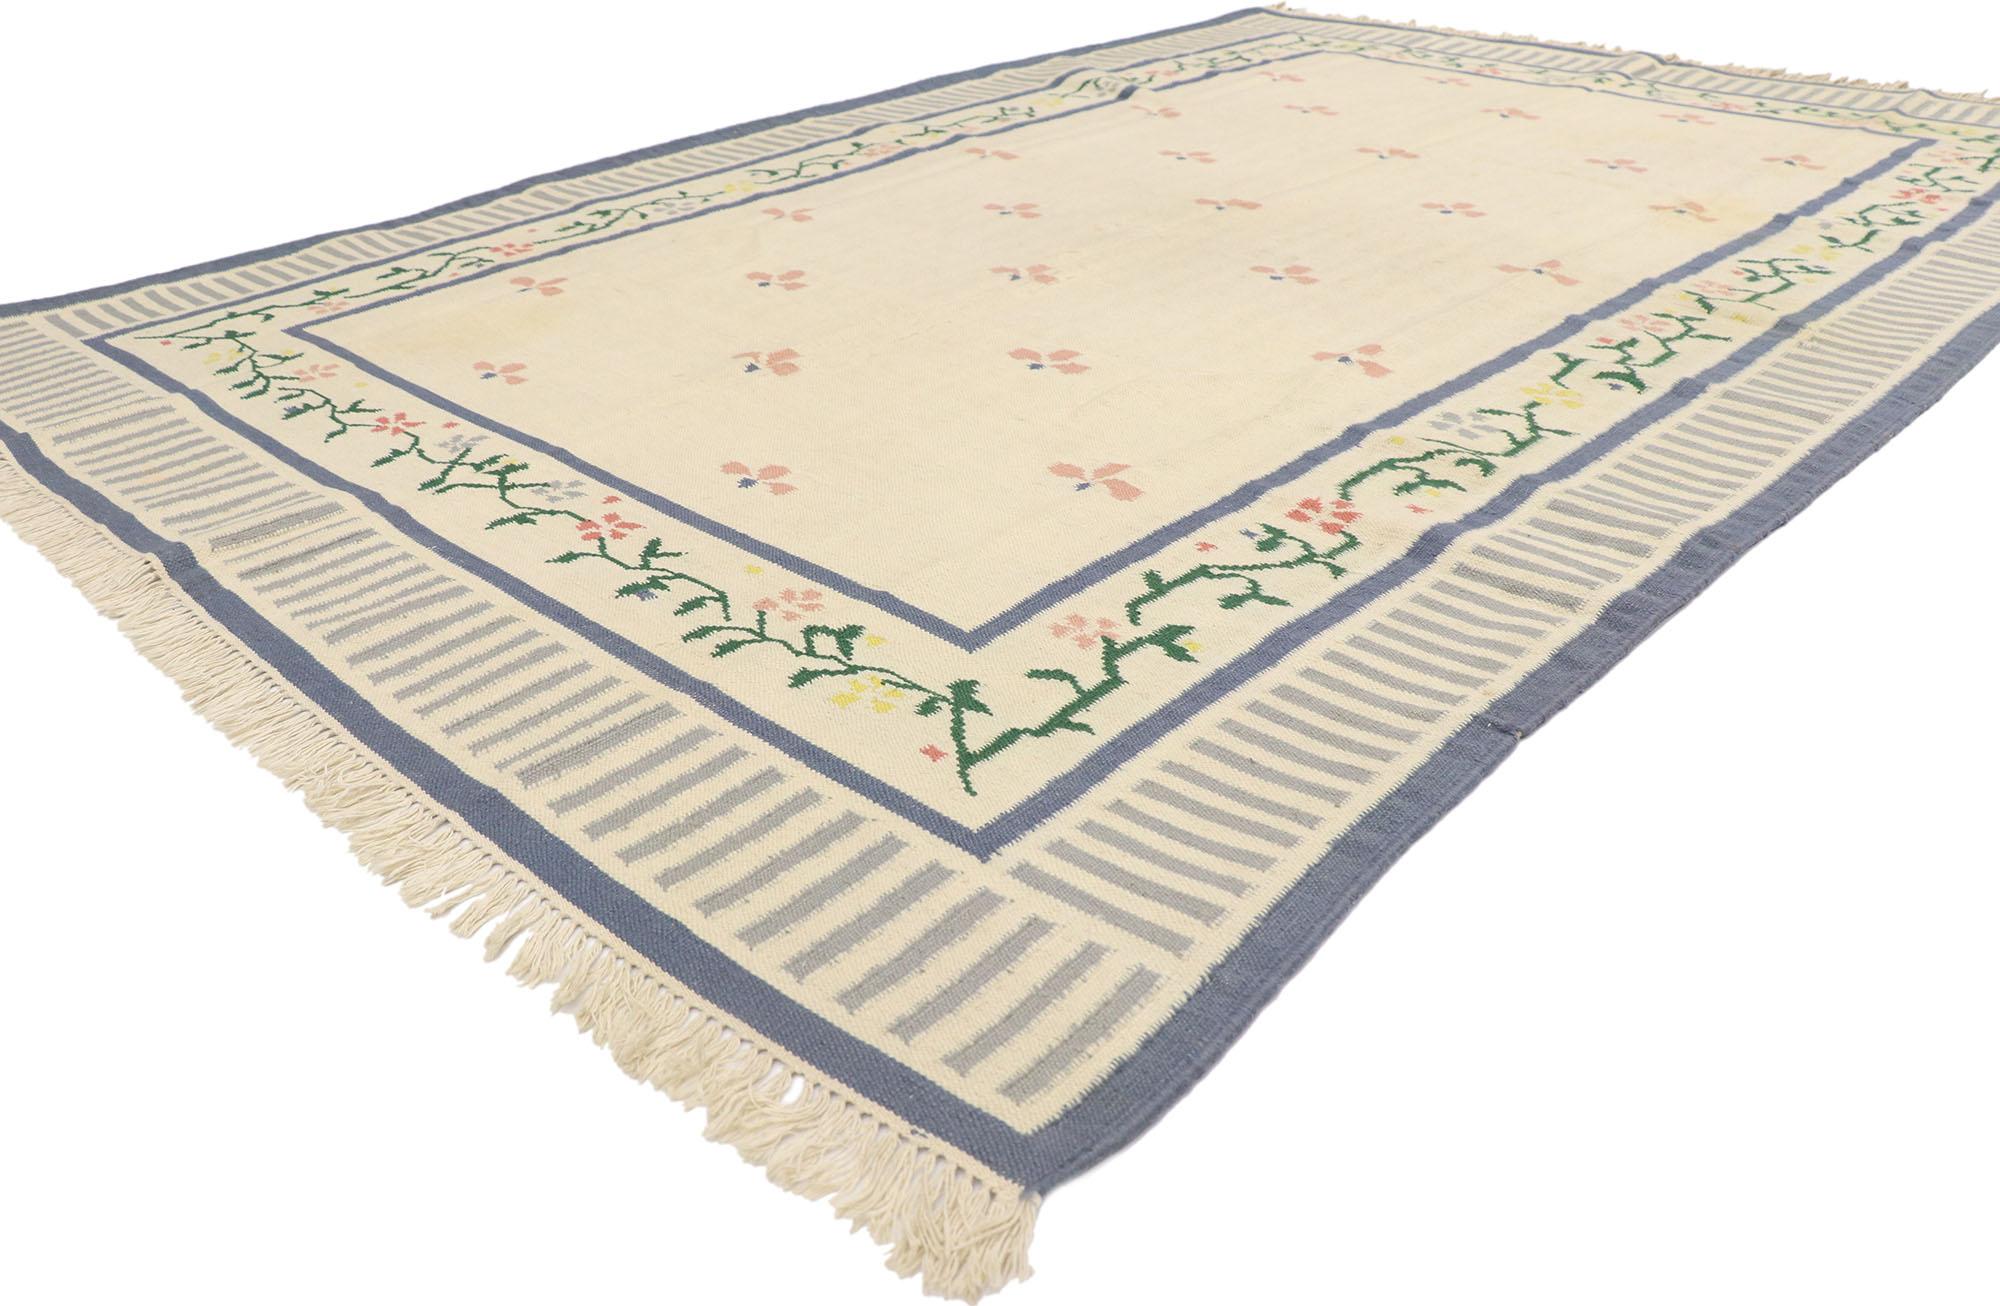 77934 Vintage Indian Dhurrie Rug, 06'00 x 08'11. Indian Dhurrie rugs, traditional flat-woven carpets made from natural fibers like cotton, wool, jute, or silk, are celebrated for their lightweight, reversible design. Handmade on looms, they feature